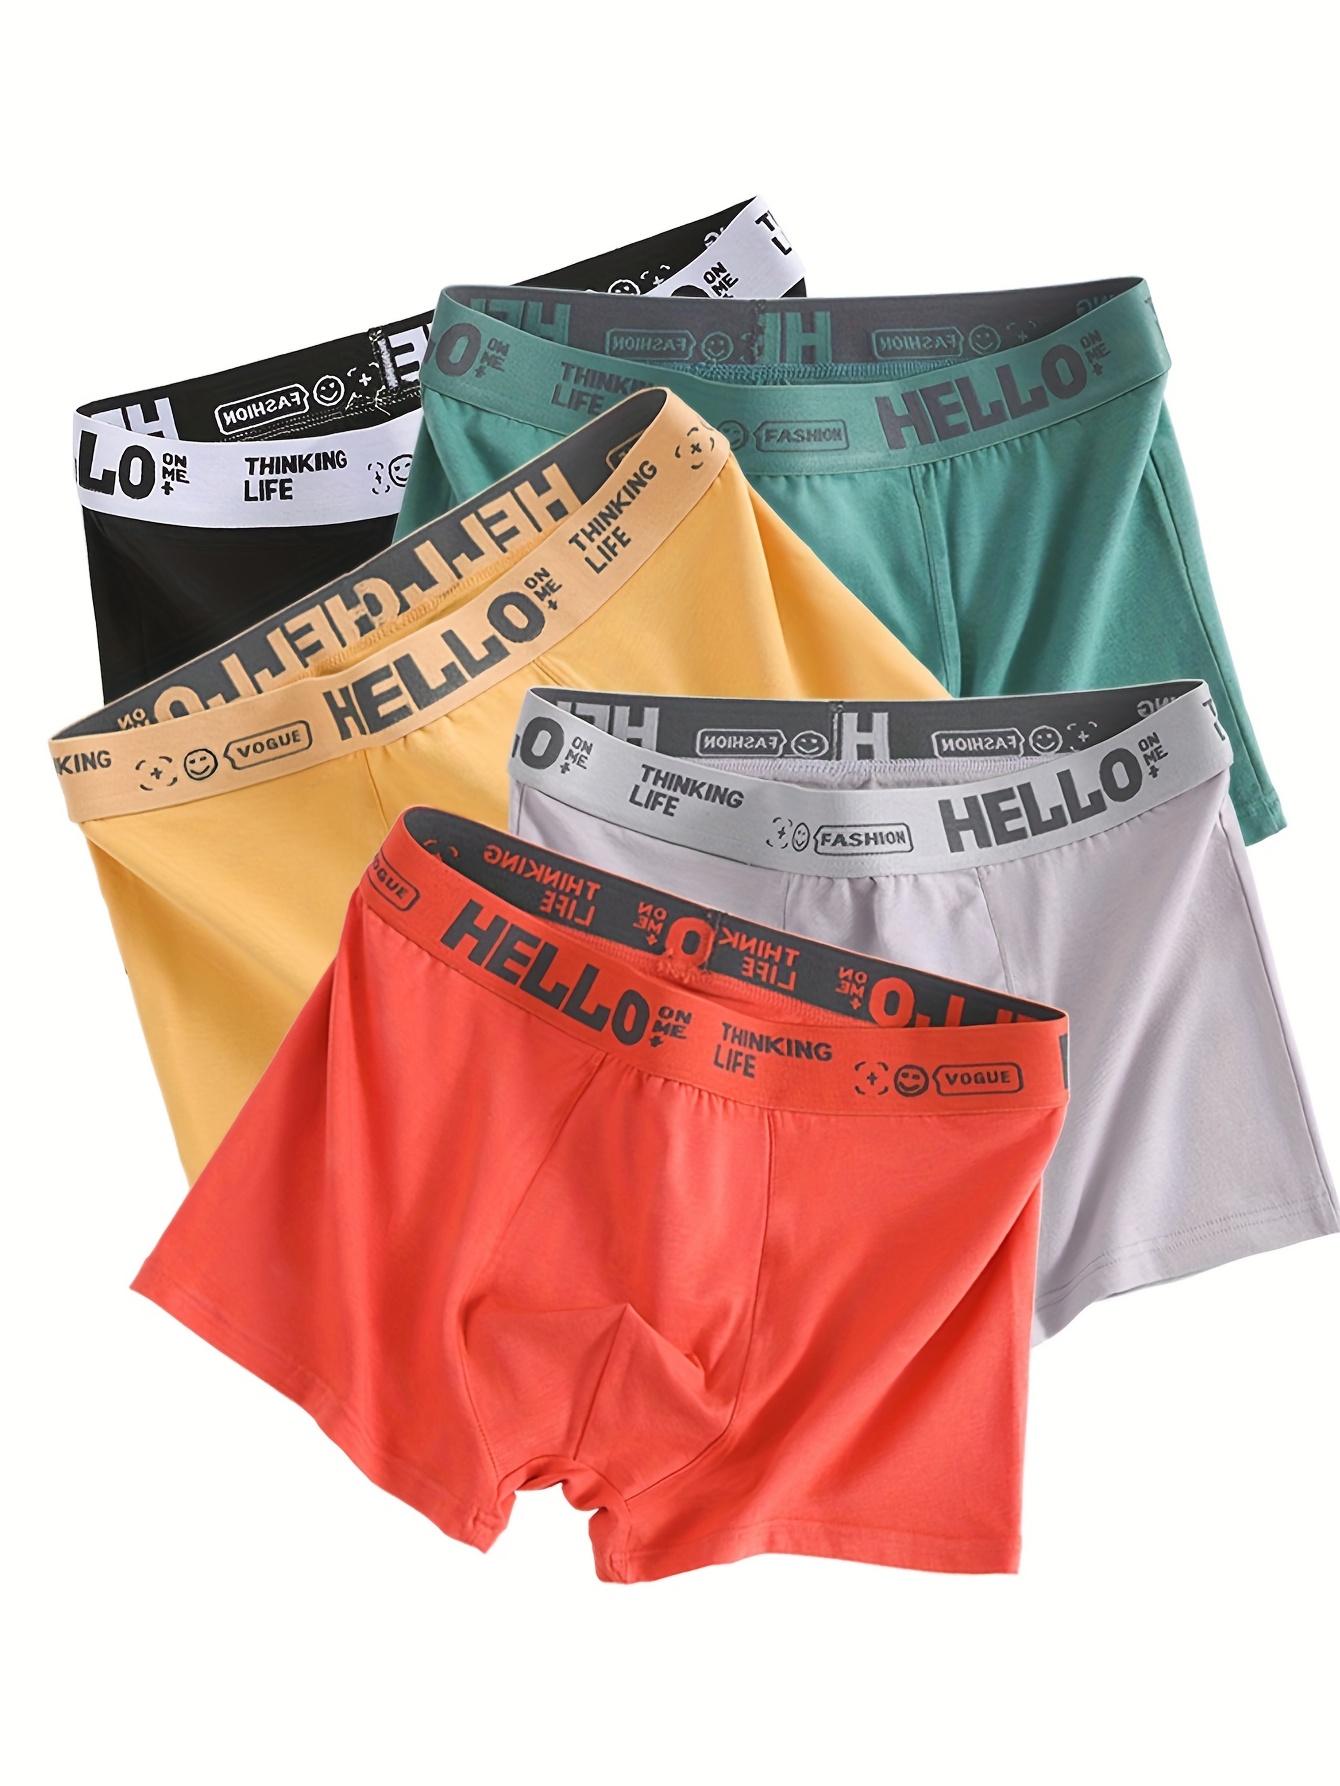 Bolter Men's 5-Pack Cotton Stretch Boxers Shorts (Small, Black) at